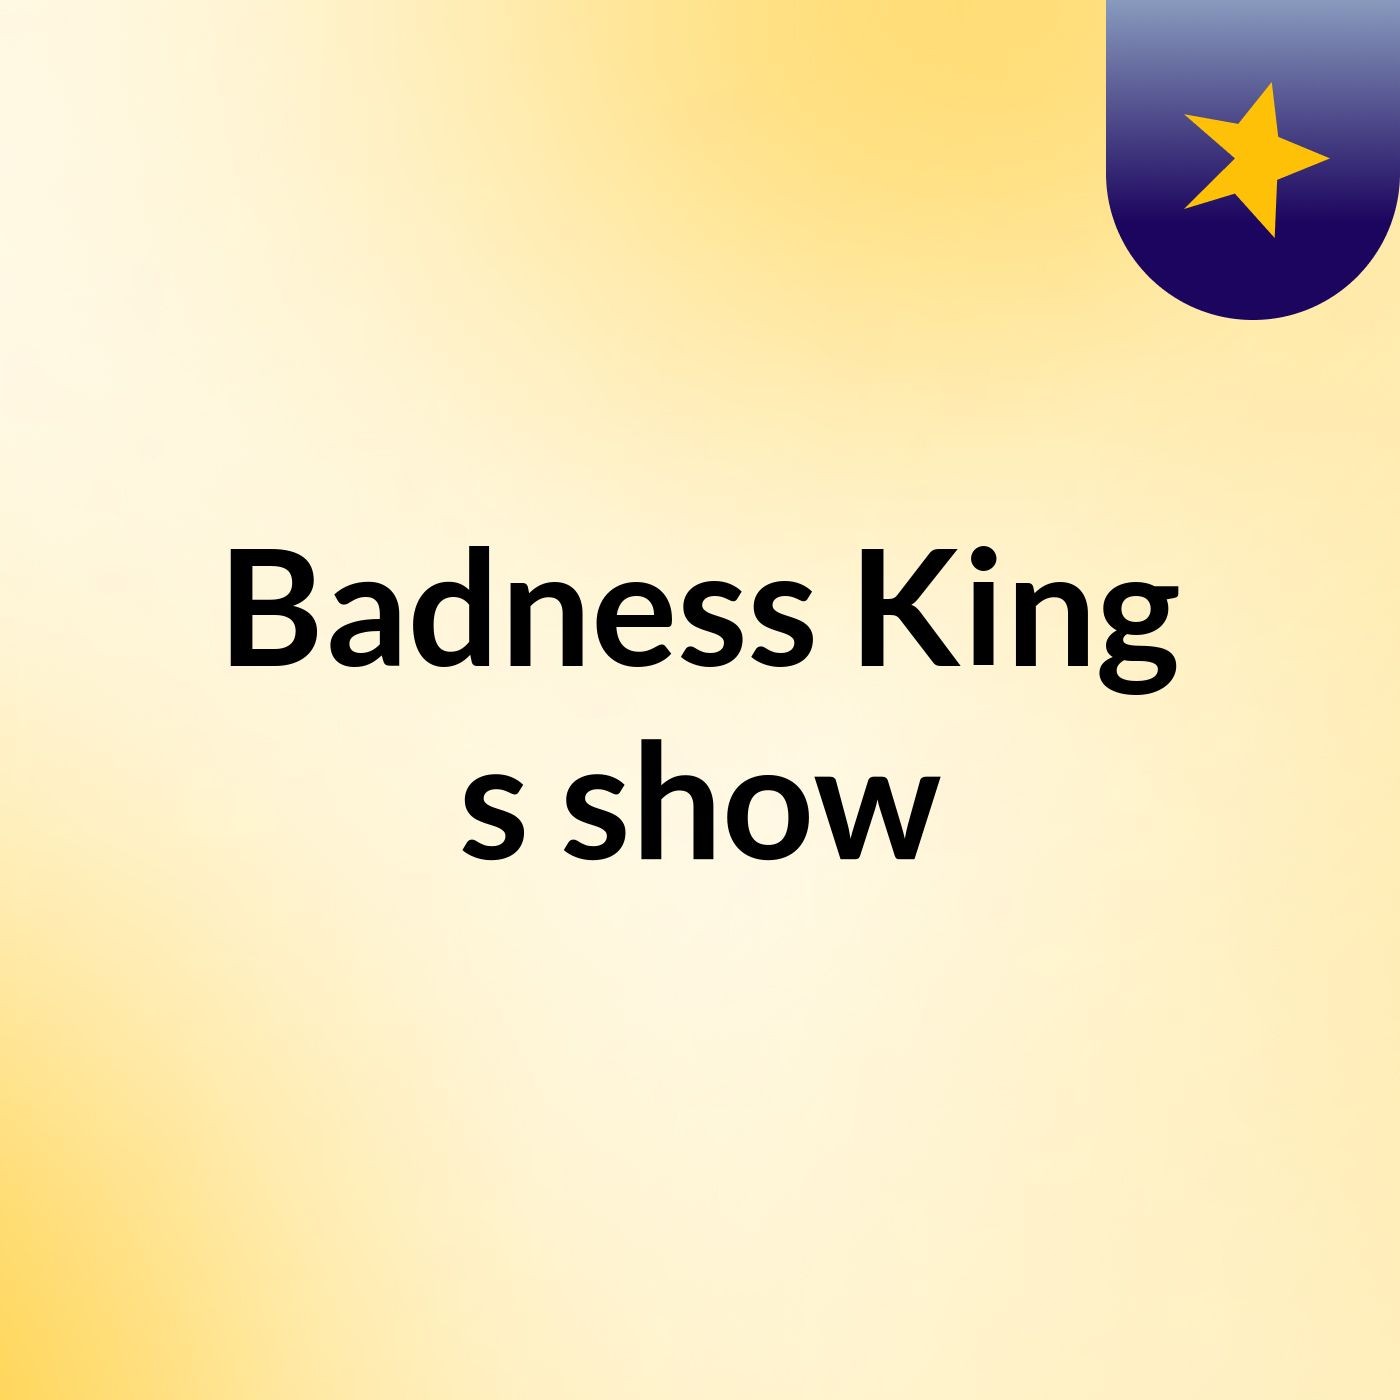 Episode 4 - Badness King's show